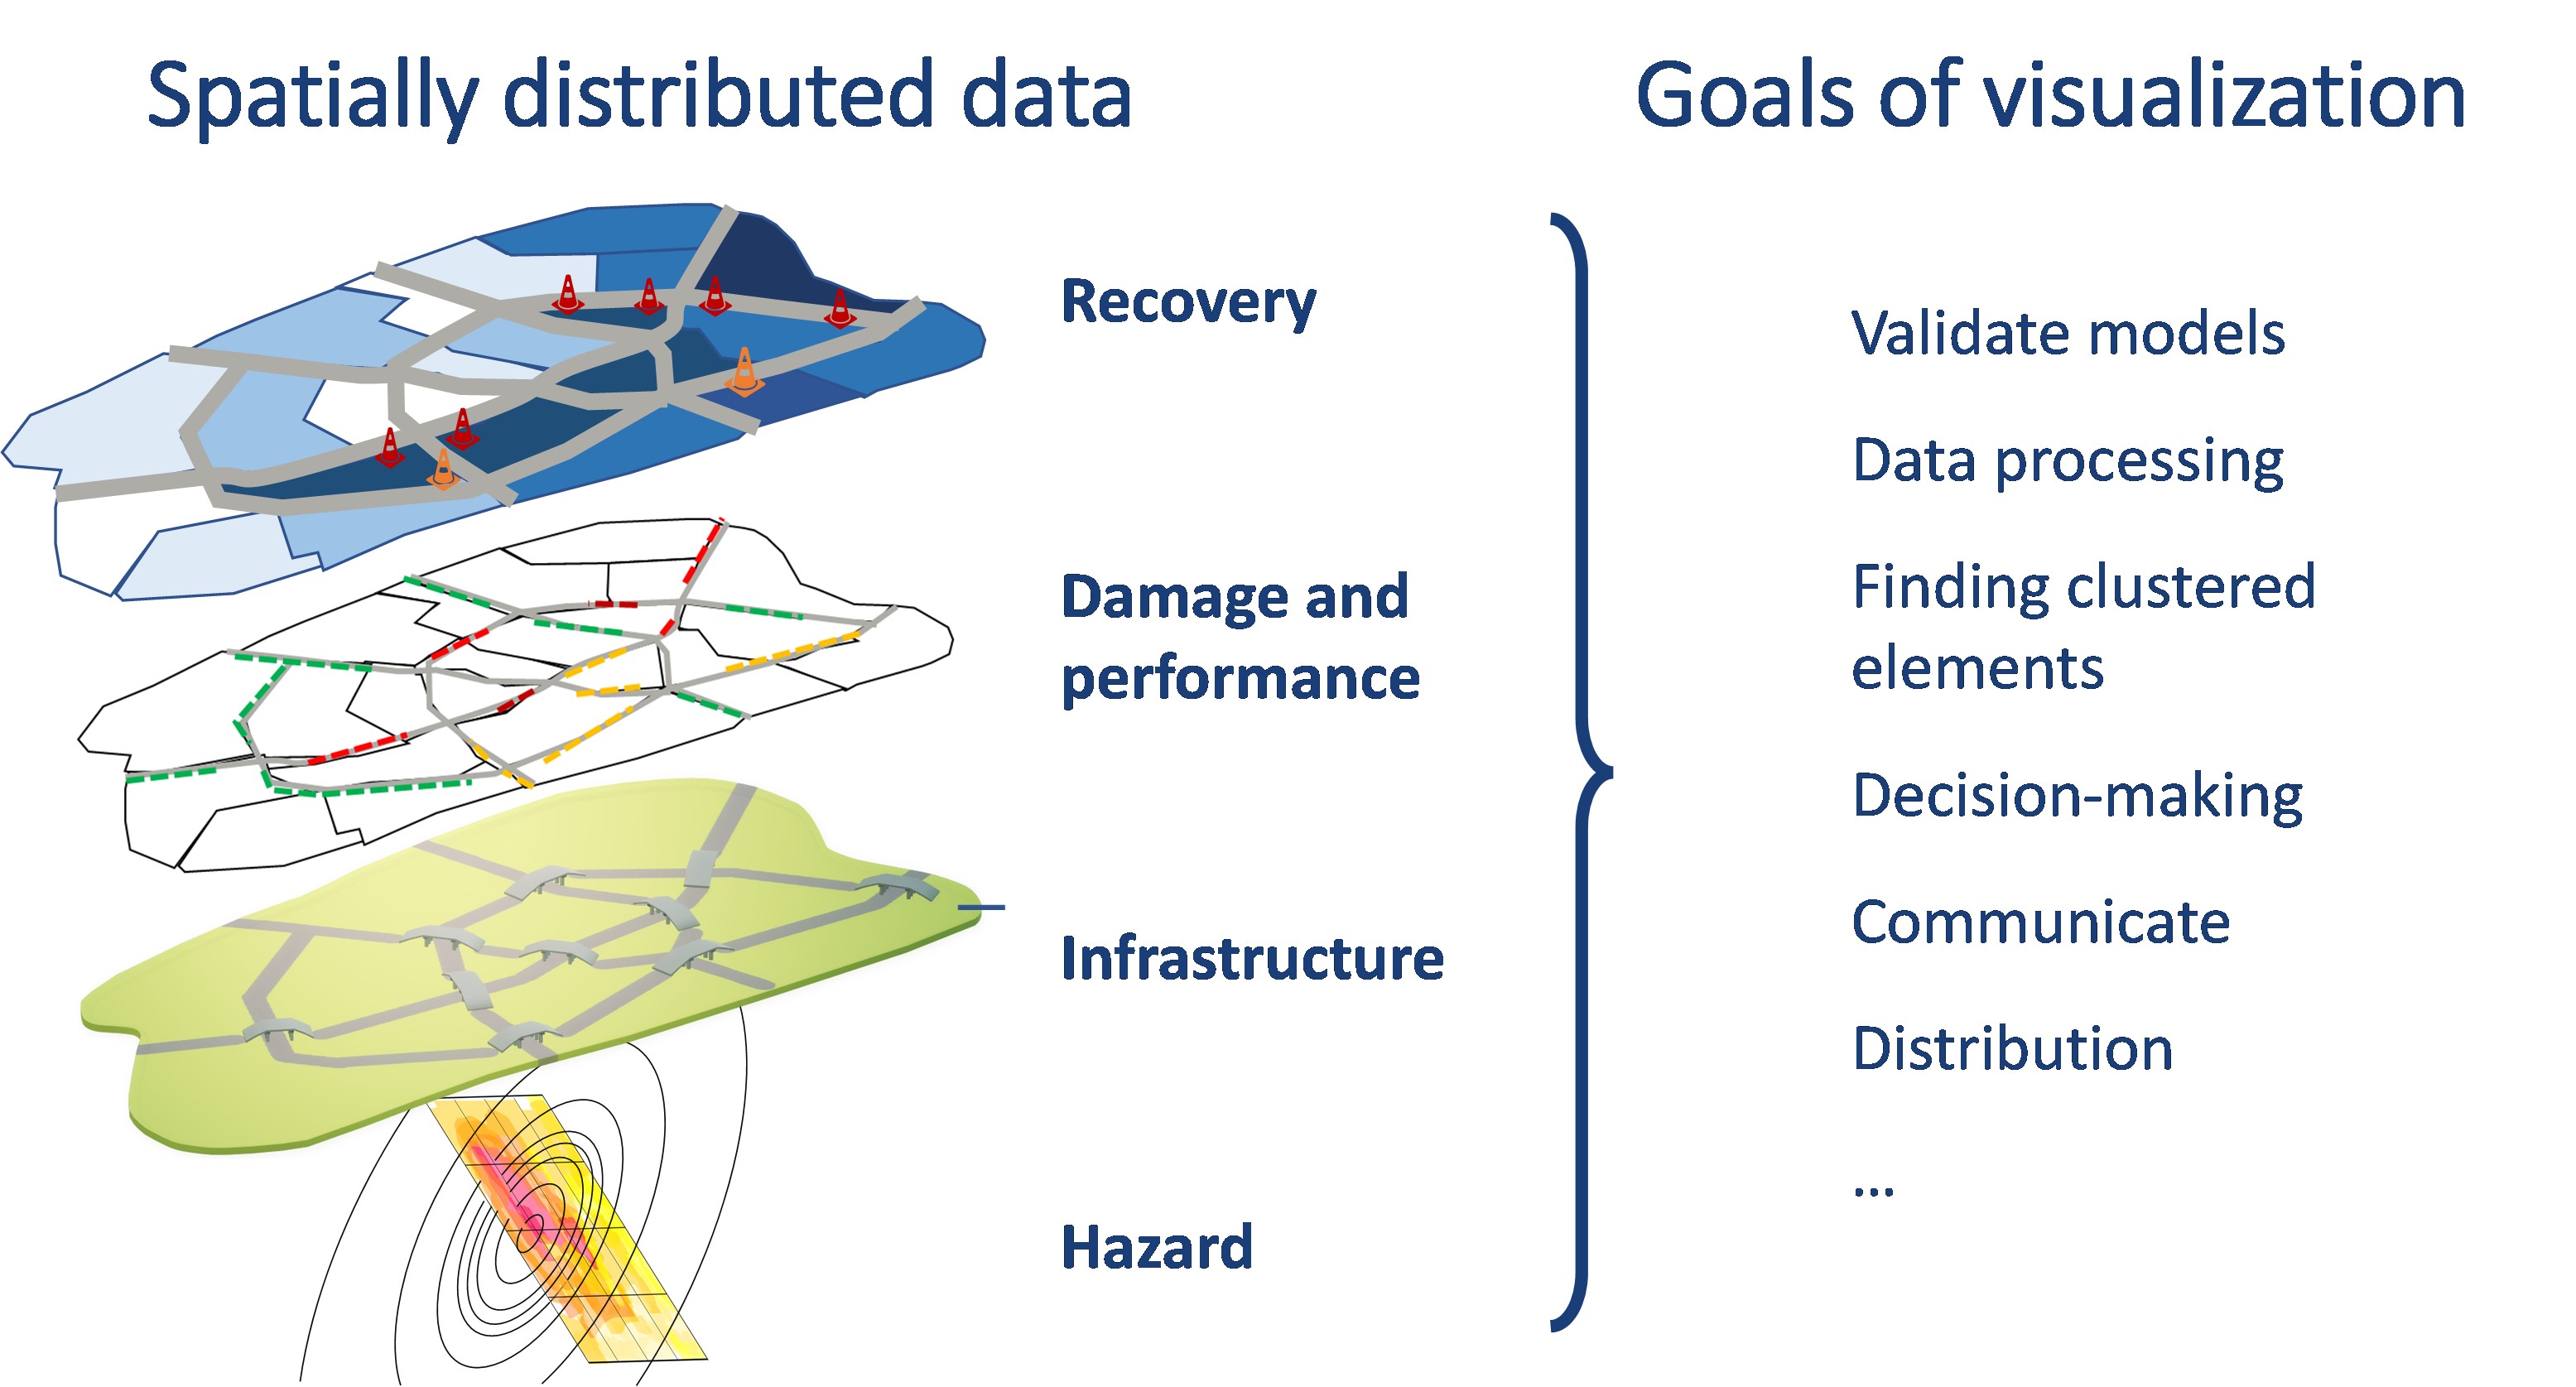 Risk and resilience outputs and stakeholder visualization needs